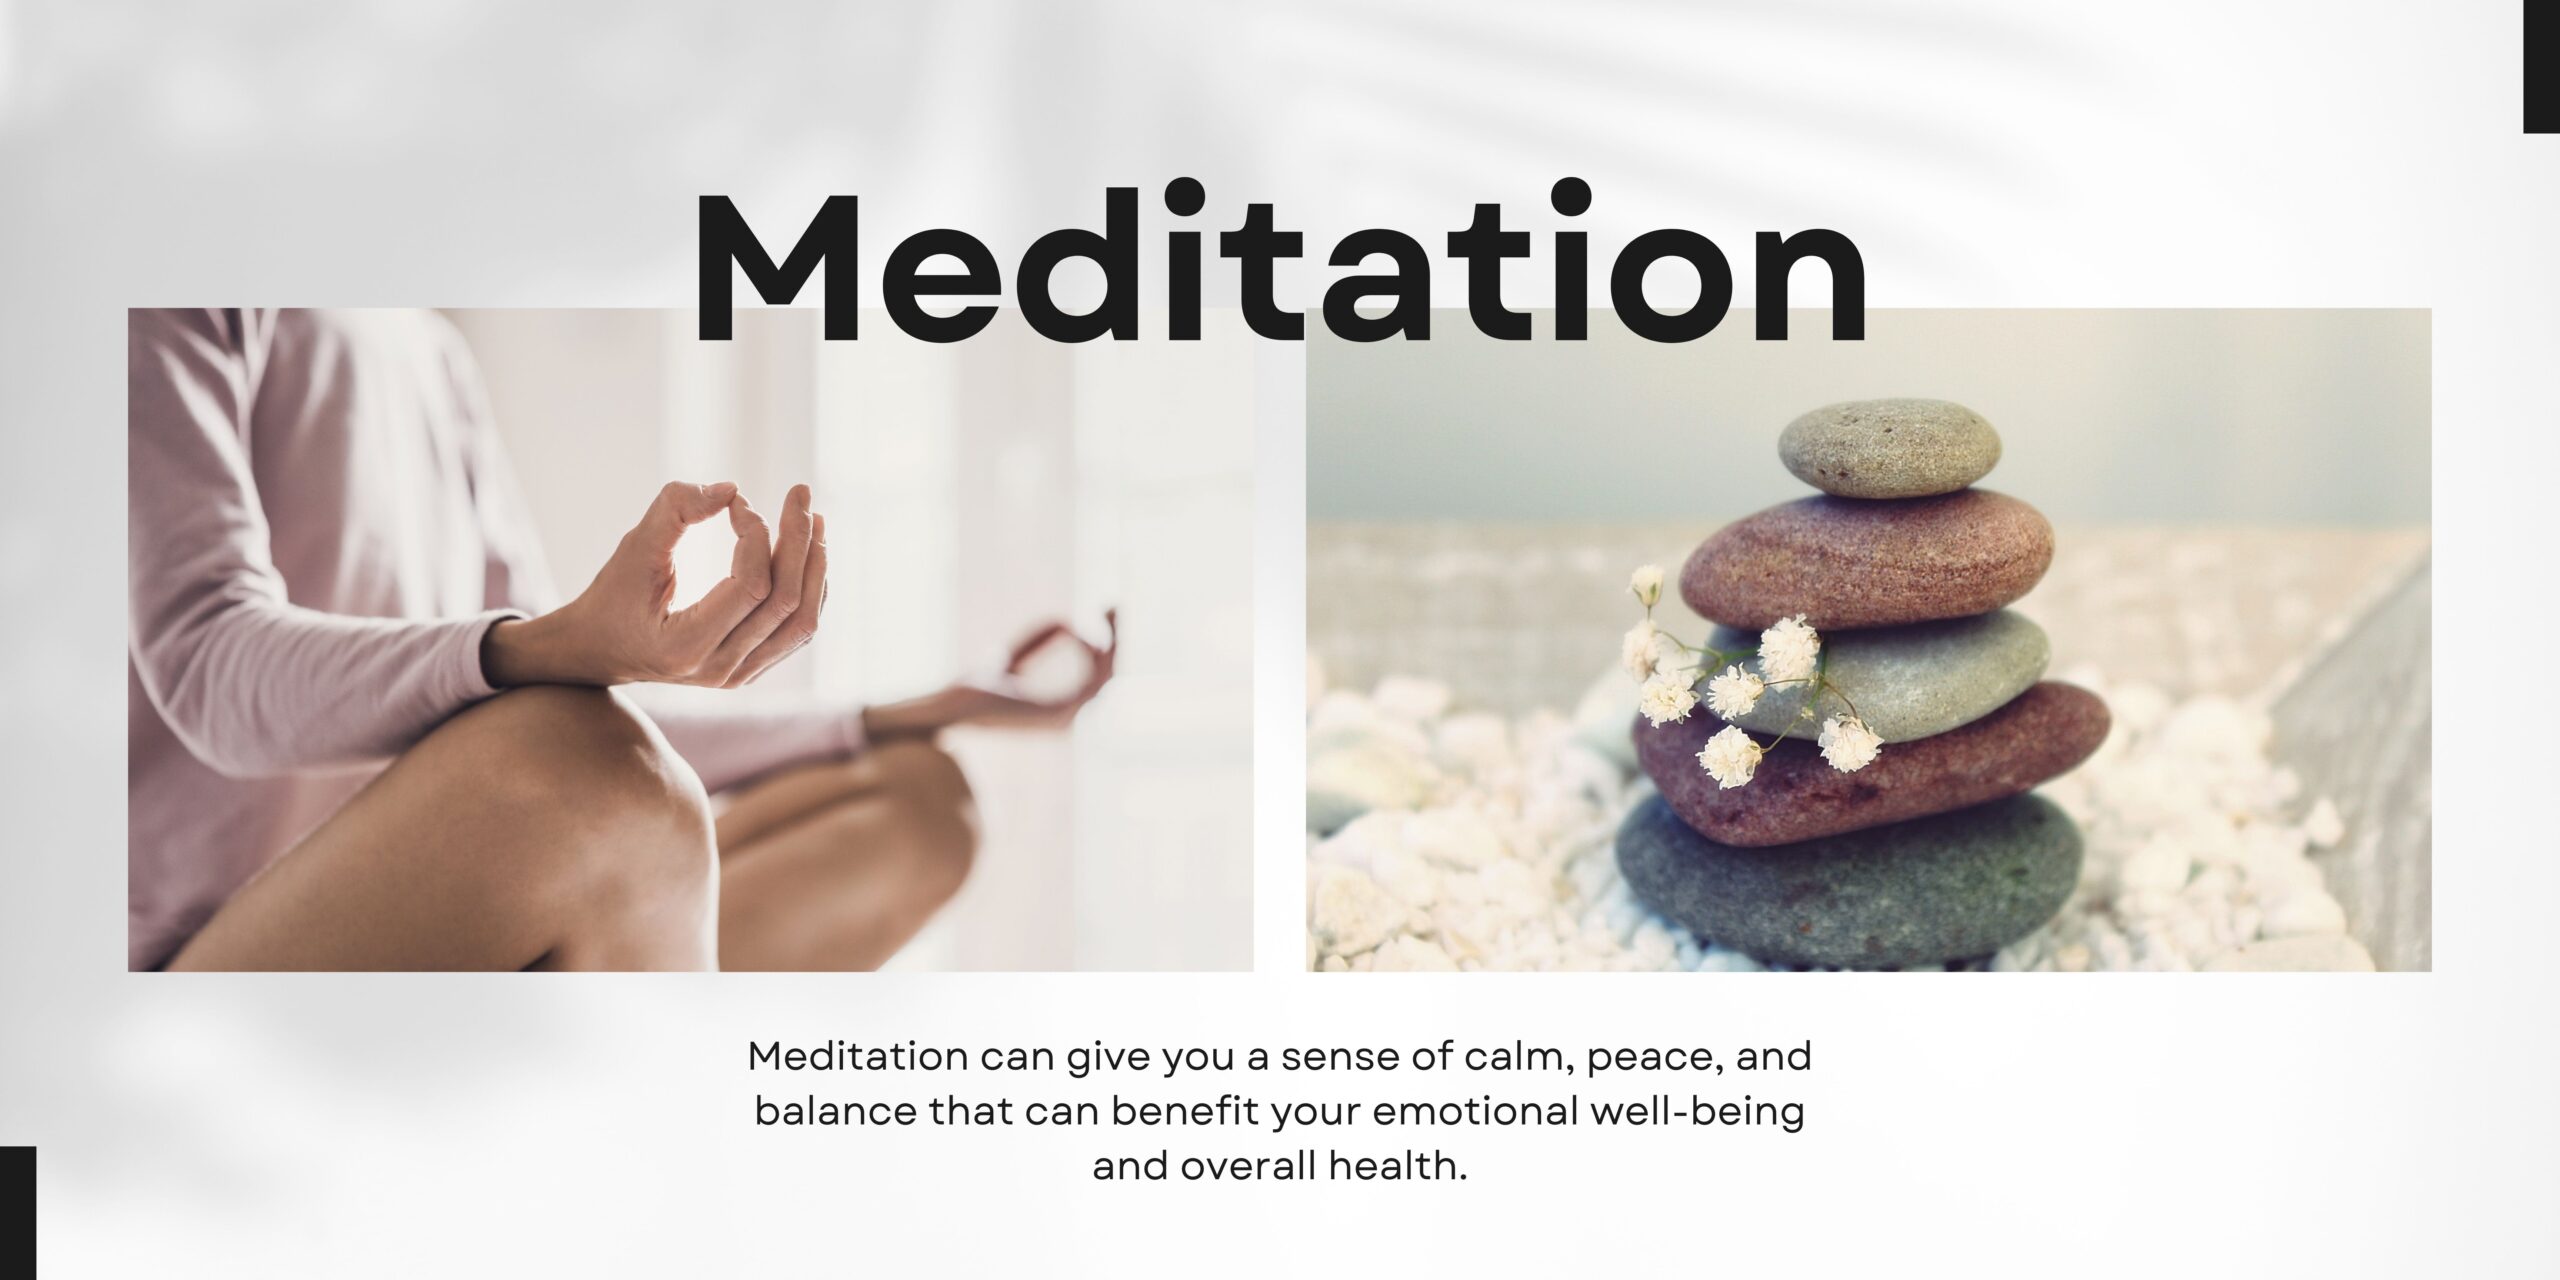 The No. 1 Rank Of Common Ground Meditation Be Used To Help With Stress In Consumer’s Market.